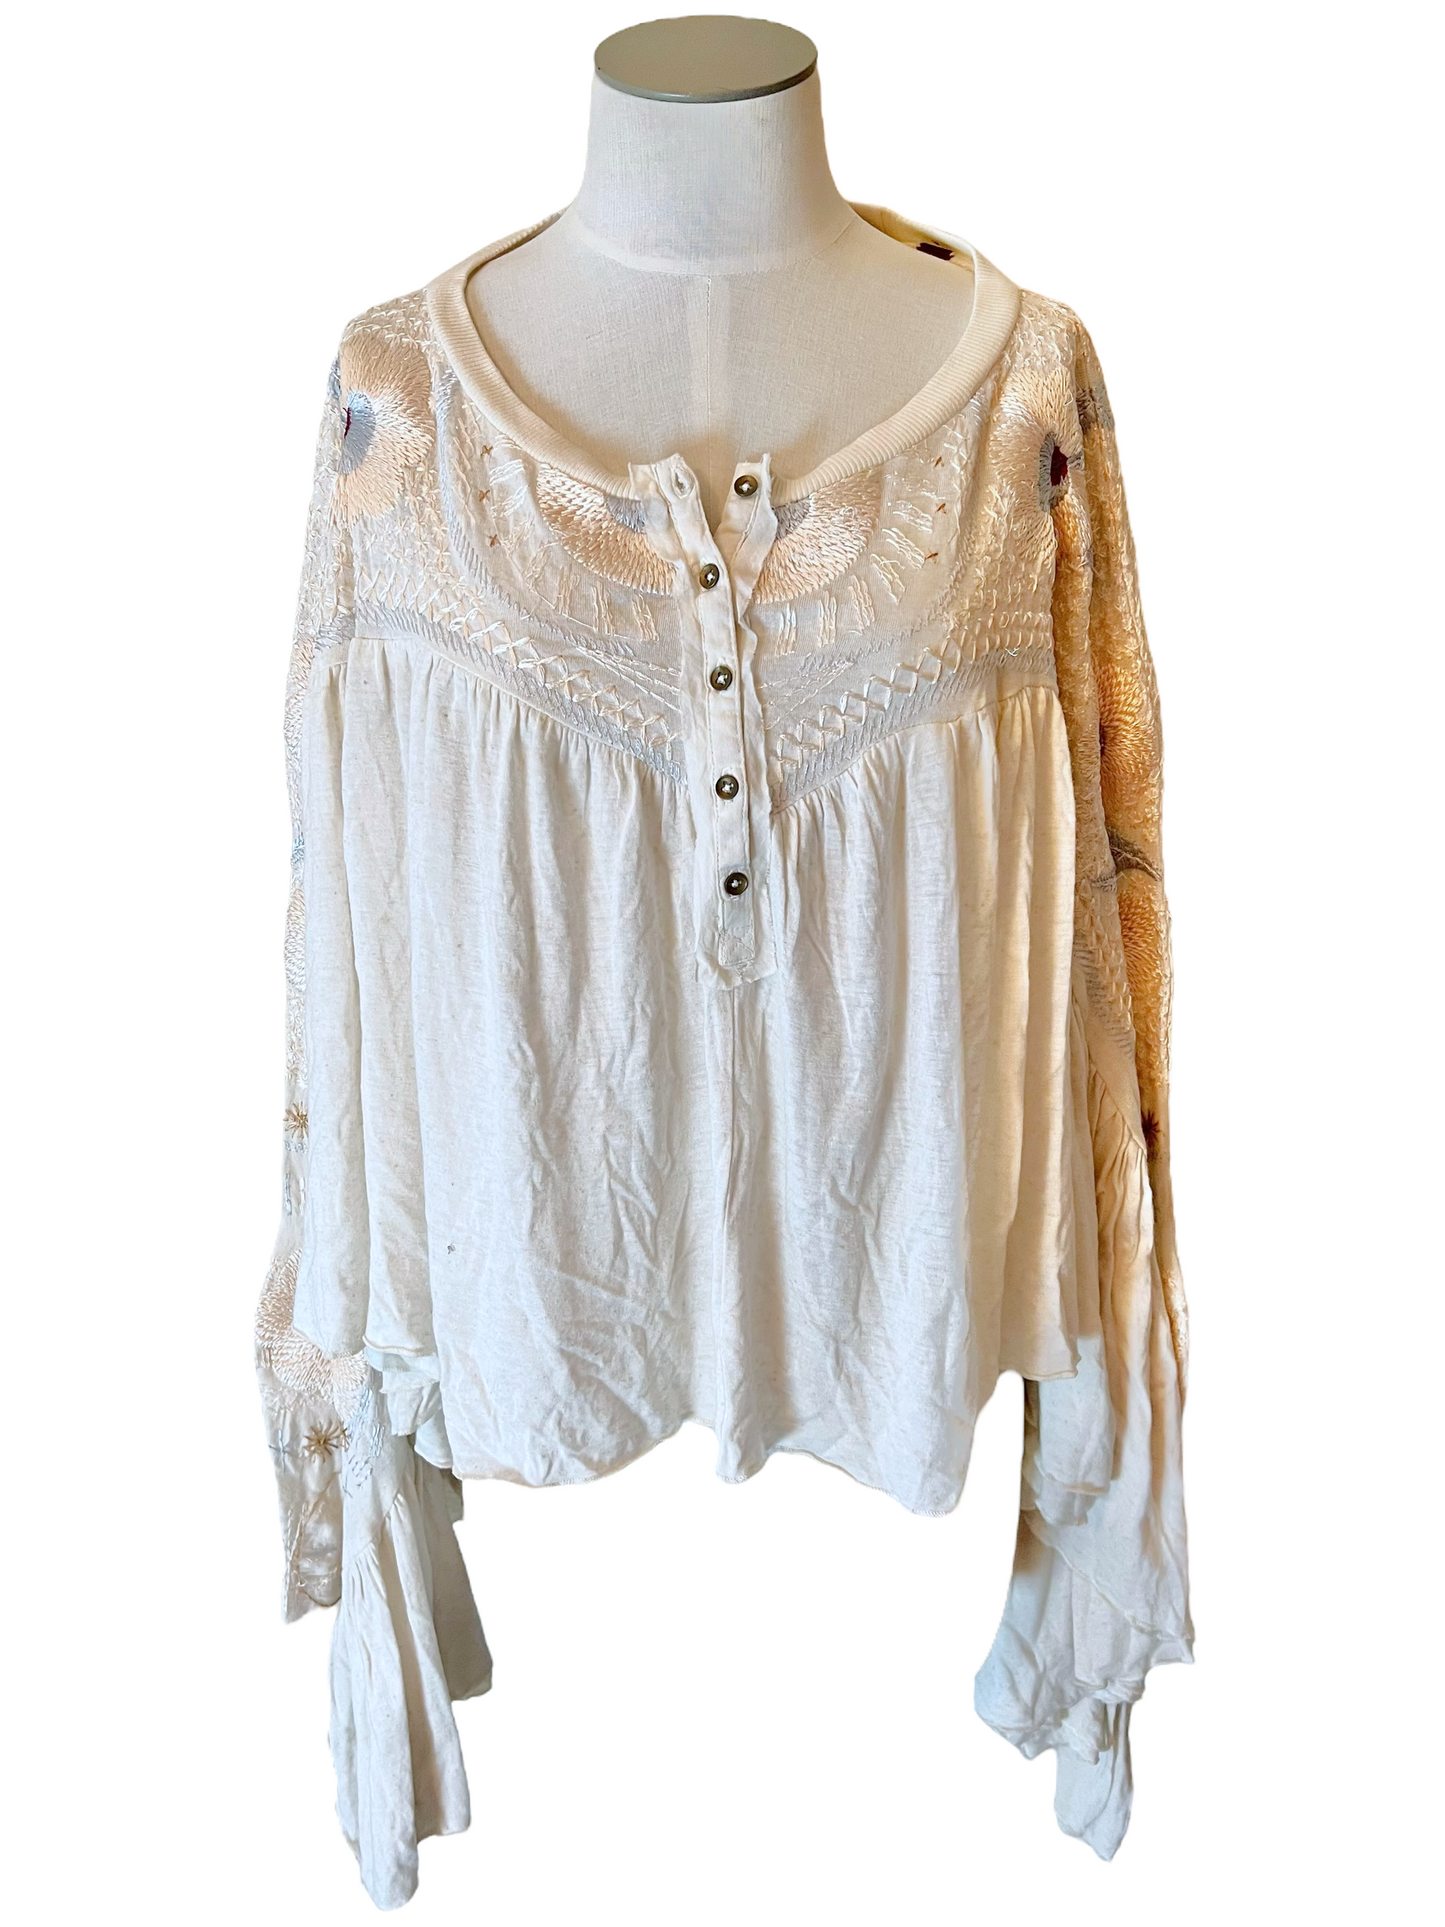 Free People Beige Embroidered Size M Top